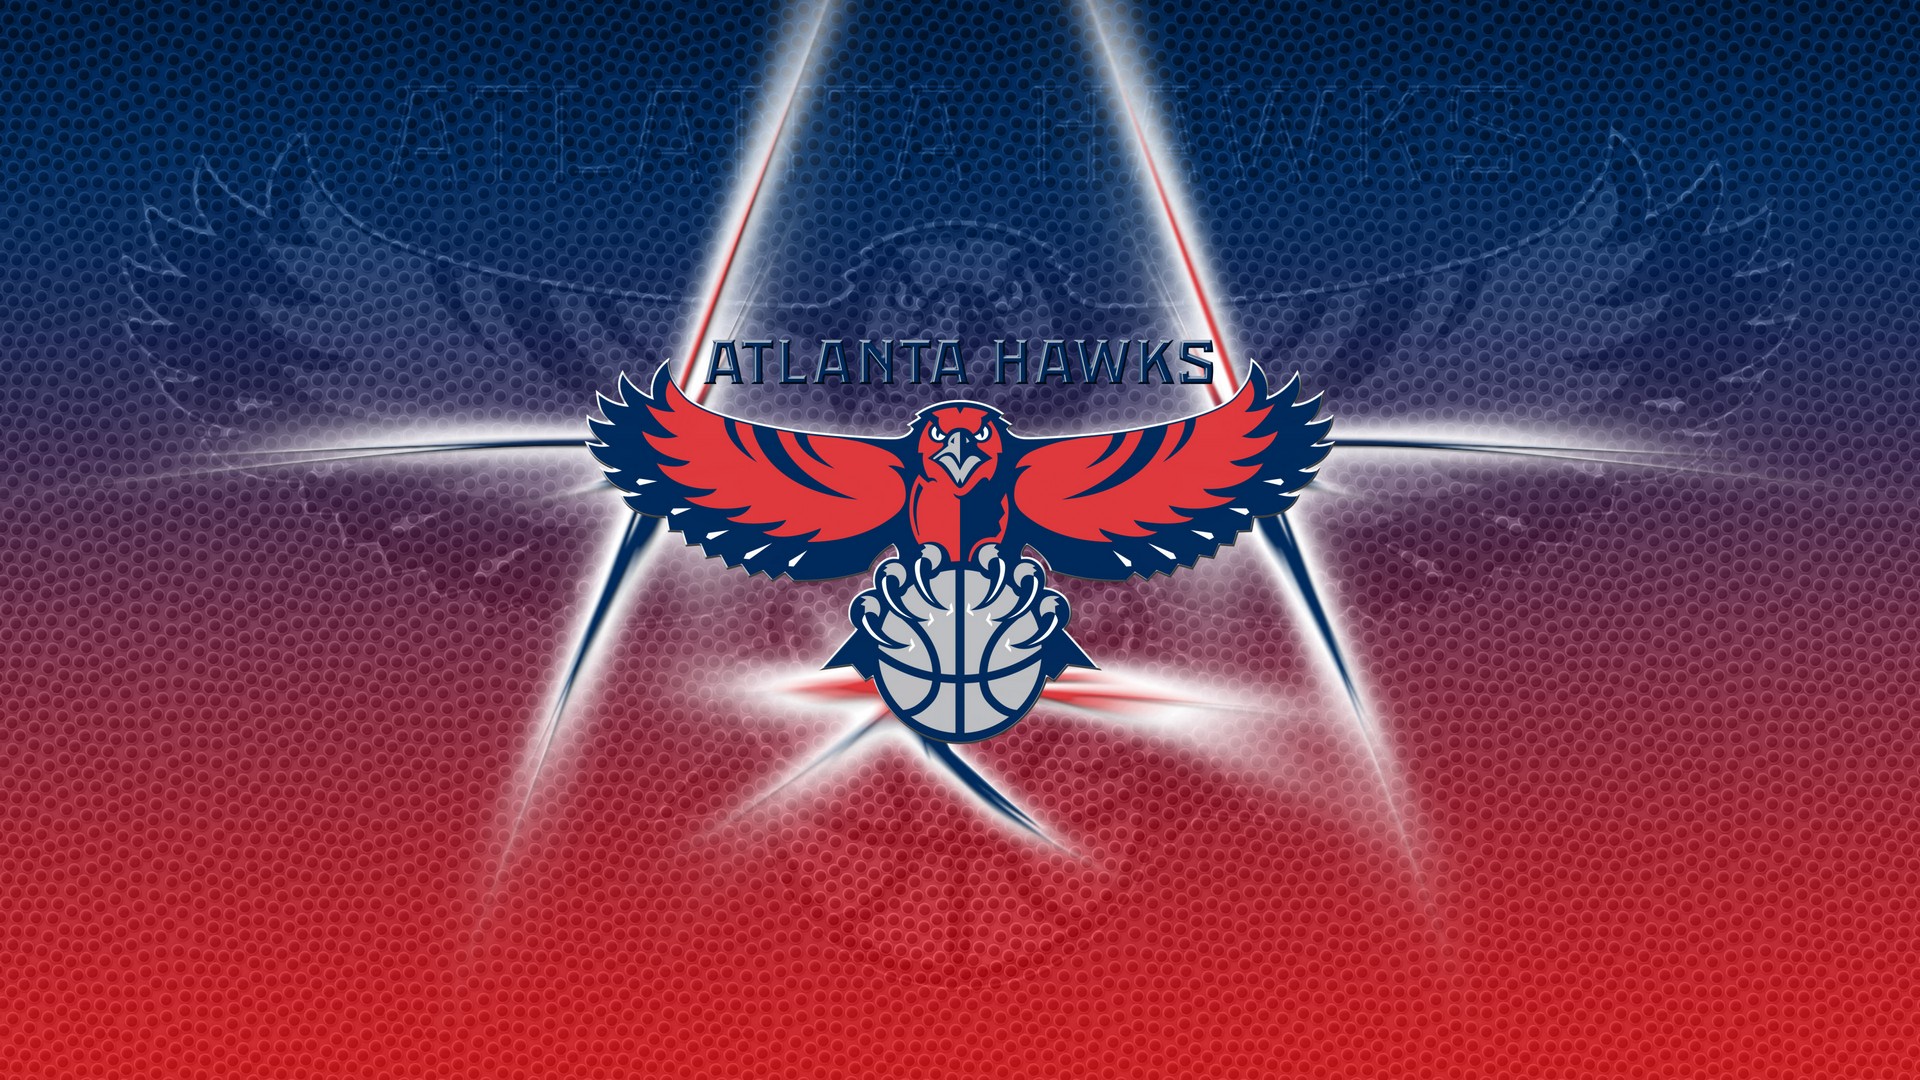 Atlanta Hawks Wallpaper For Mac Backgrounds with image dimensions 1920X1080 pixel. You can make this wallpaper for your Desktop Computer Backgrounds, Windows or Mac Screensavers, iPhone Lock screen, Tablet or Android and another Mobile Phone device